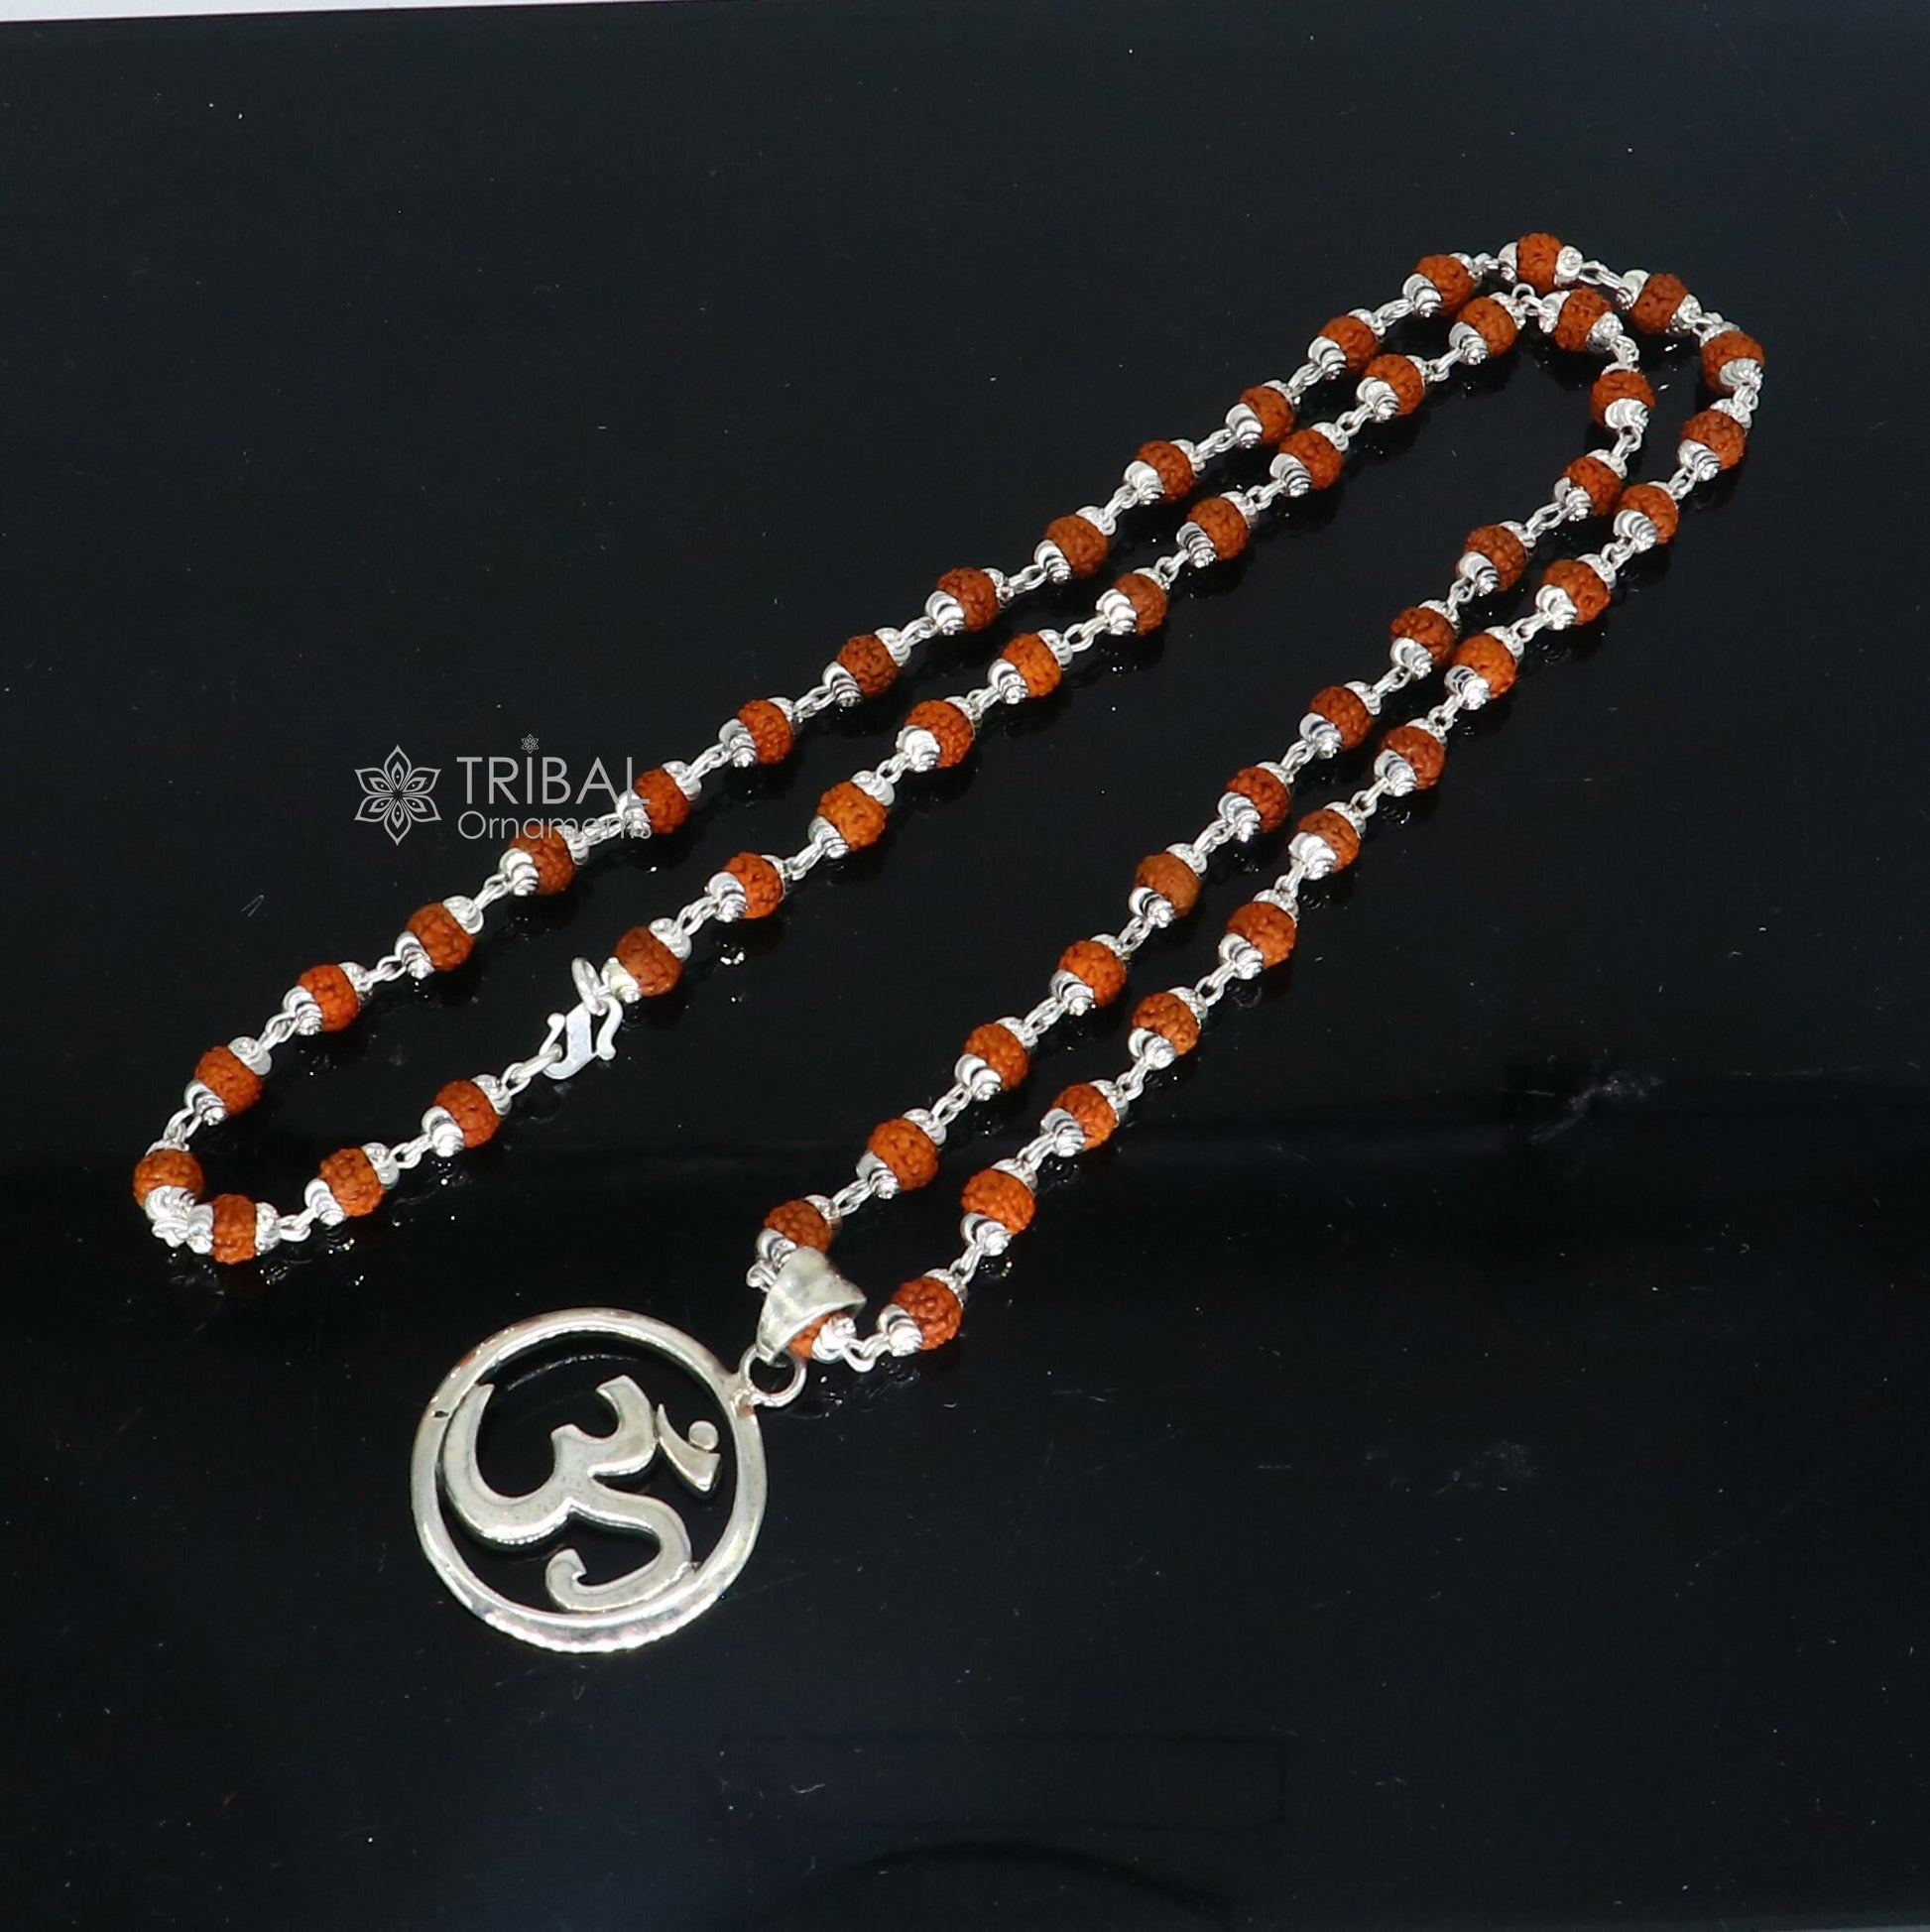 925 sterling silver handmade Divine Aum mantra pendant & Rudraksha chain, holy mantra pendant protect from negative energy nsp758 - TRIBAL ORNAMENTS